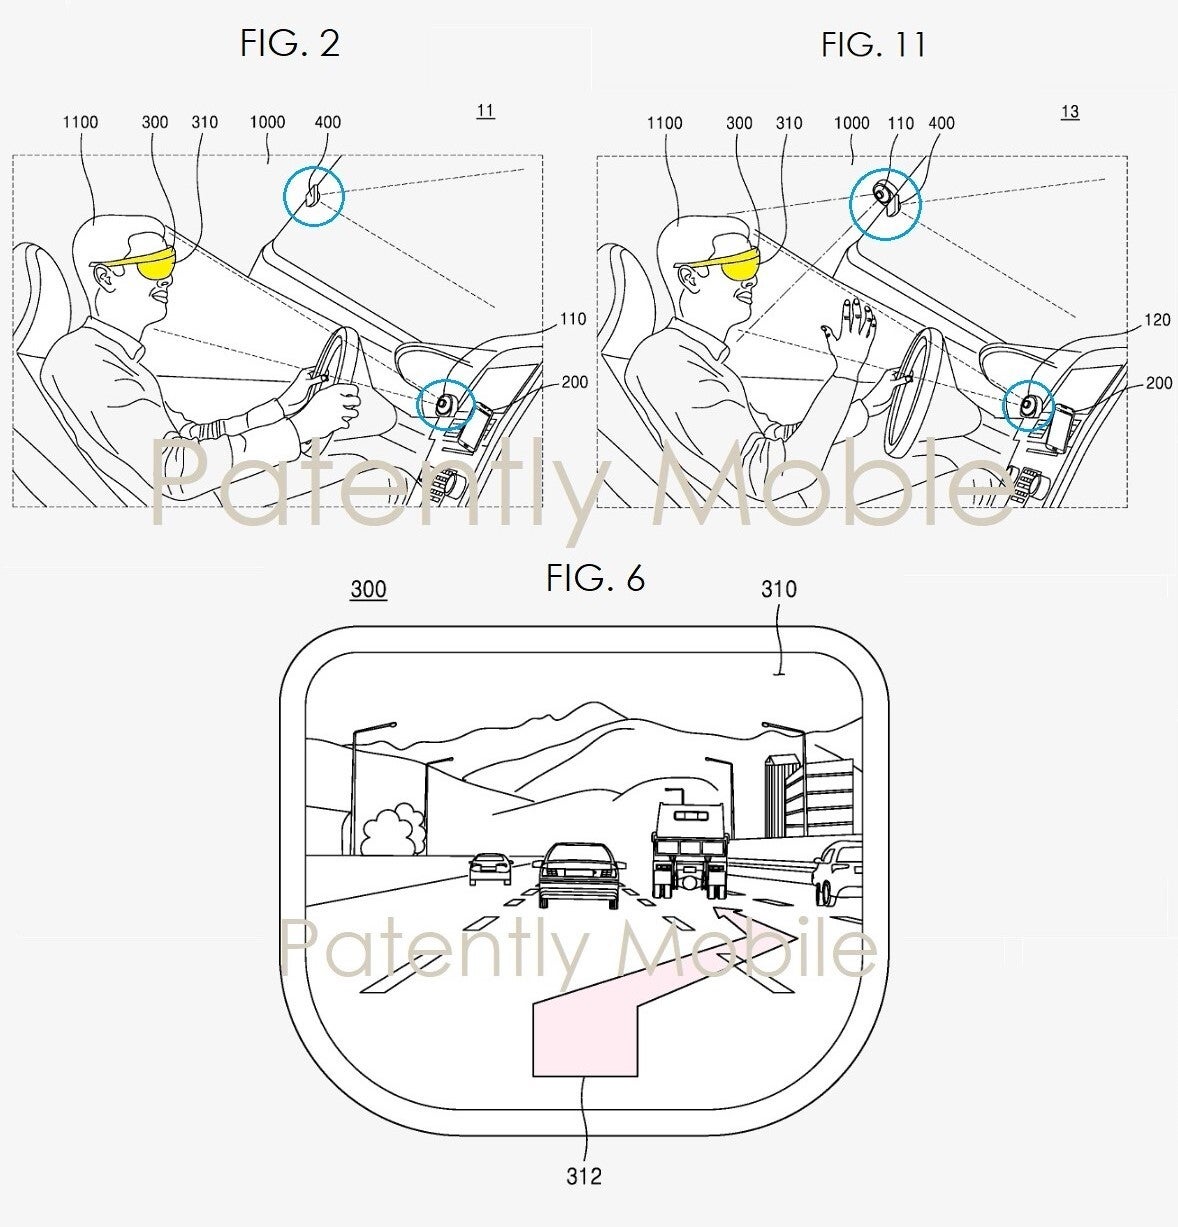 Patent gives insight into Samsung's AR glasses and some of their features